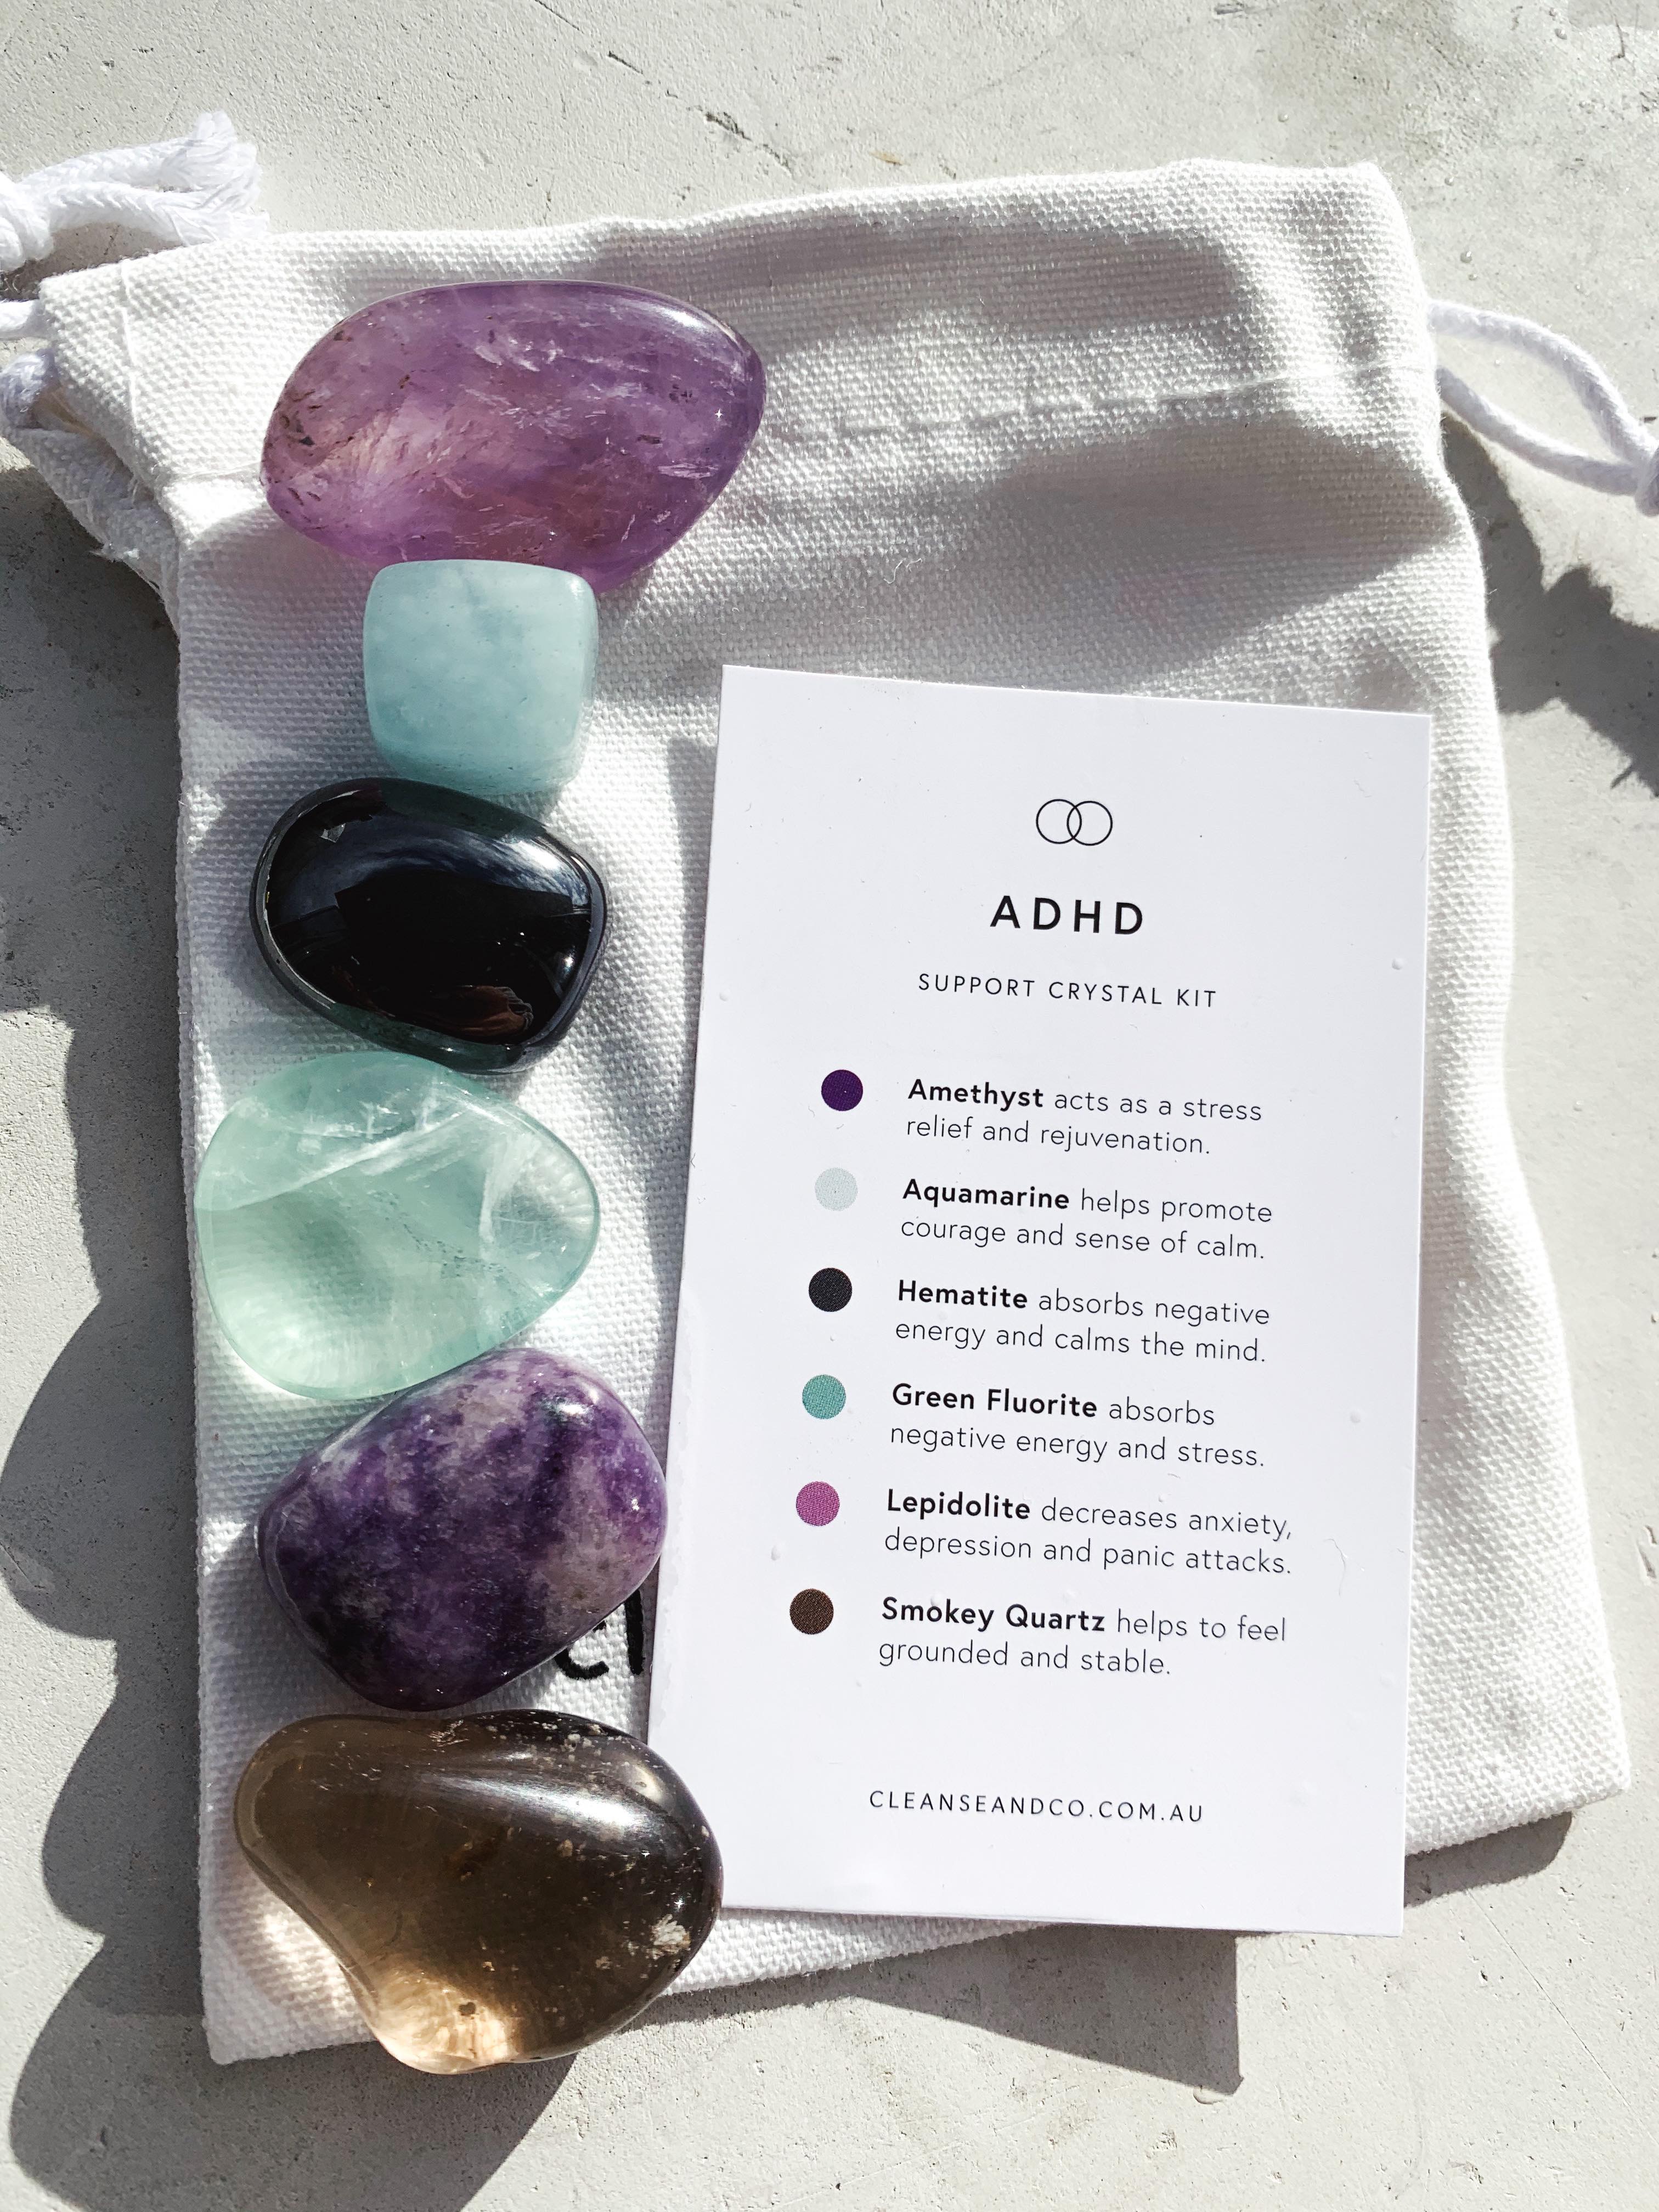 ADHD Support Crystal Kit